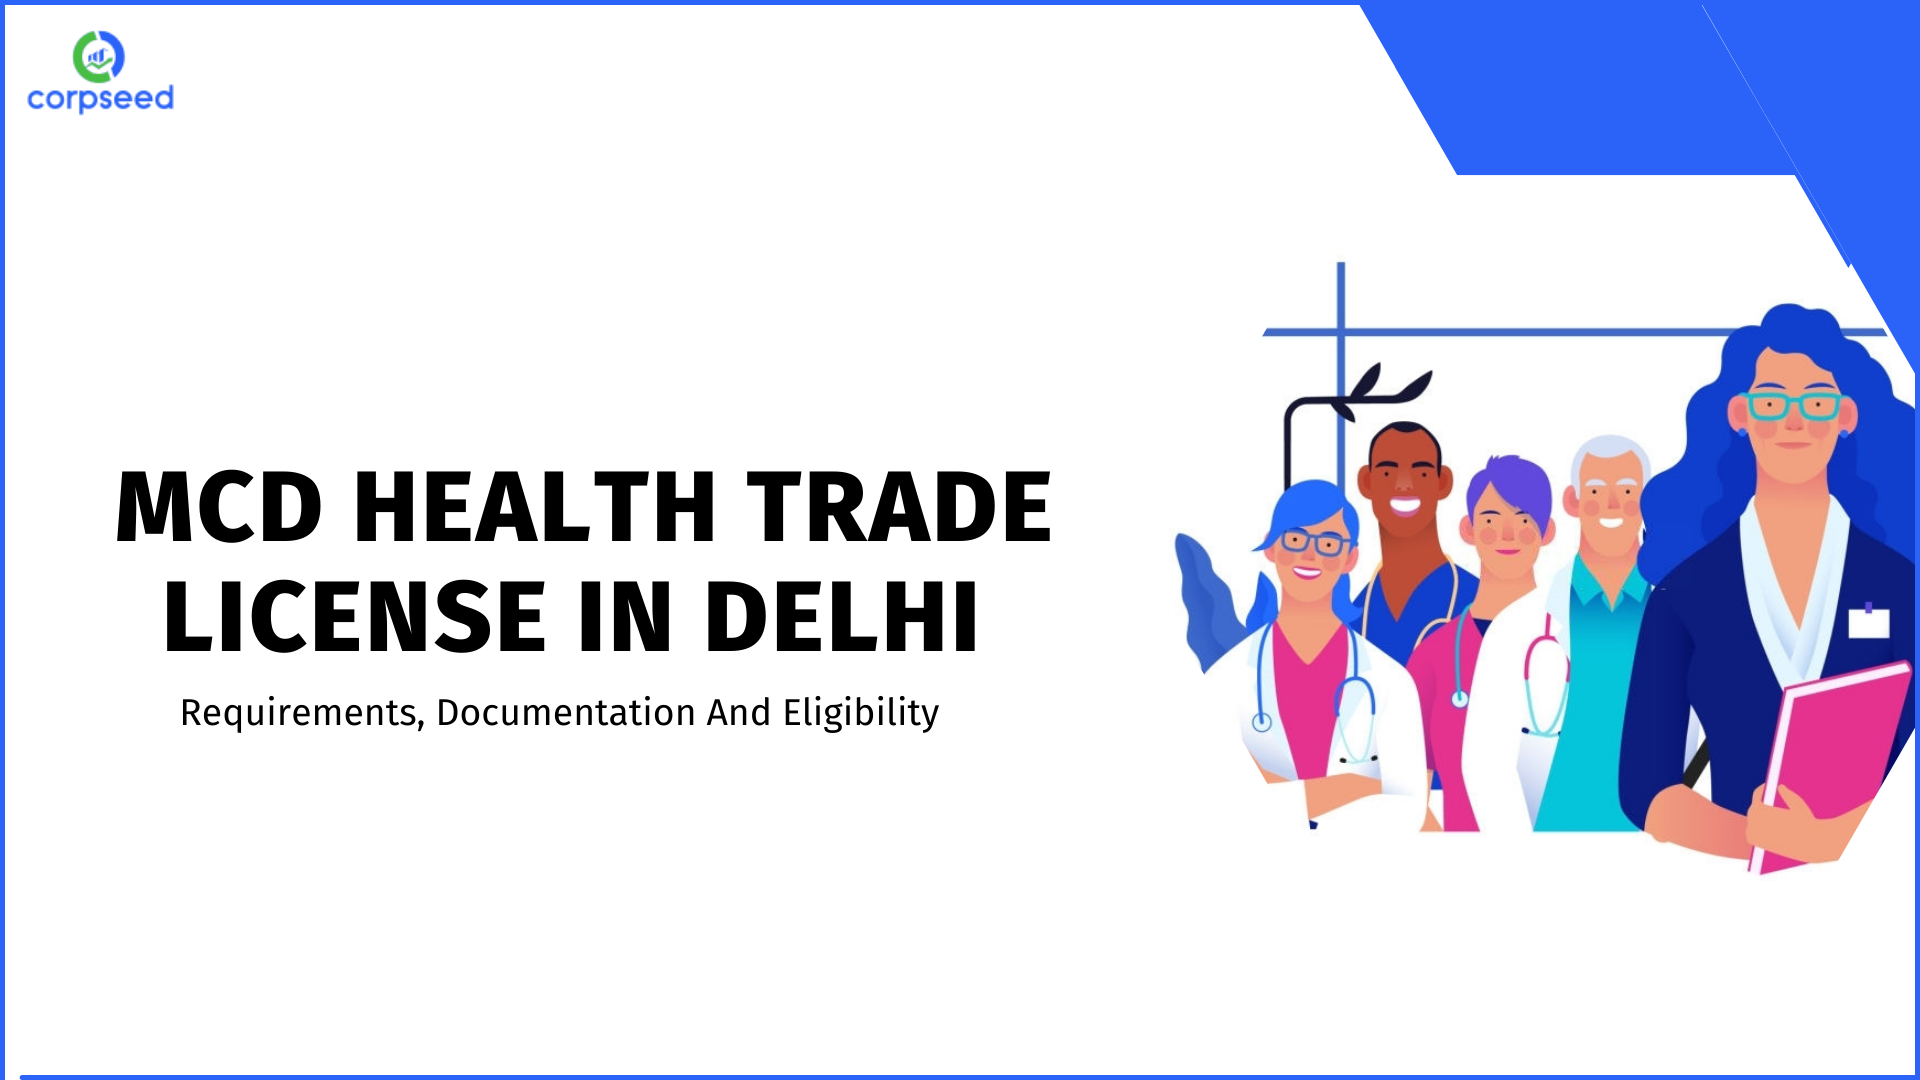 mcd-health-trade-license-in-delhi-requirements-documentation-and-eligibility-corpseed.png